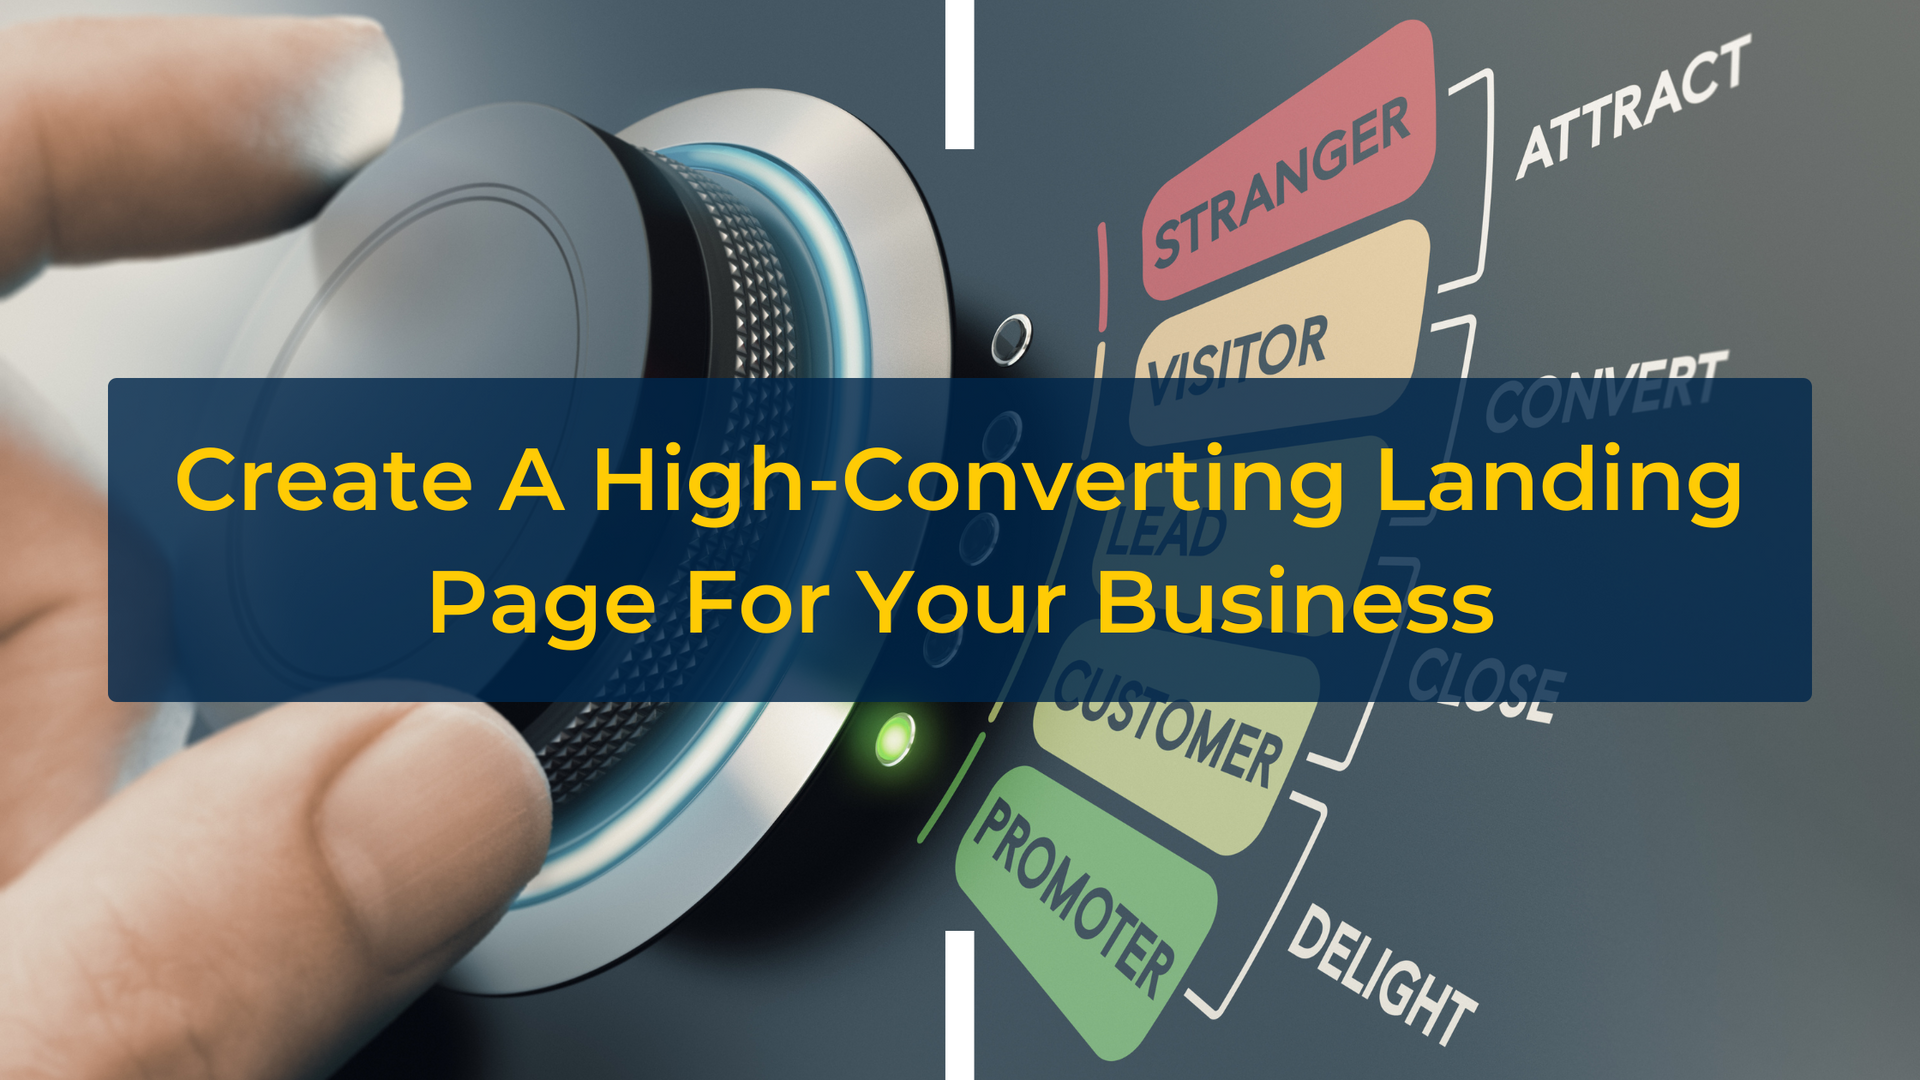 Create A High-Converting Landing Page For Your Business